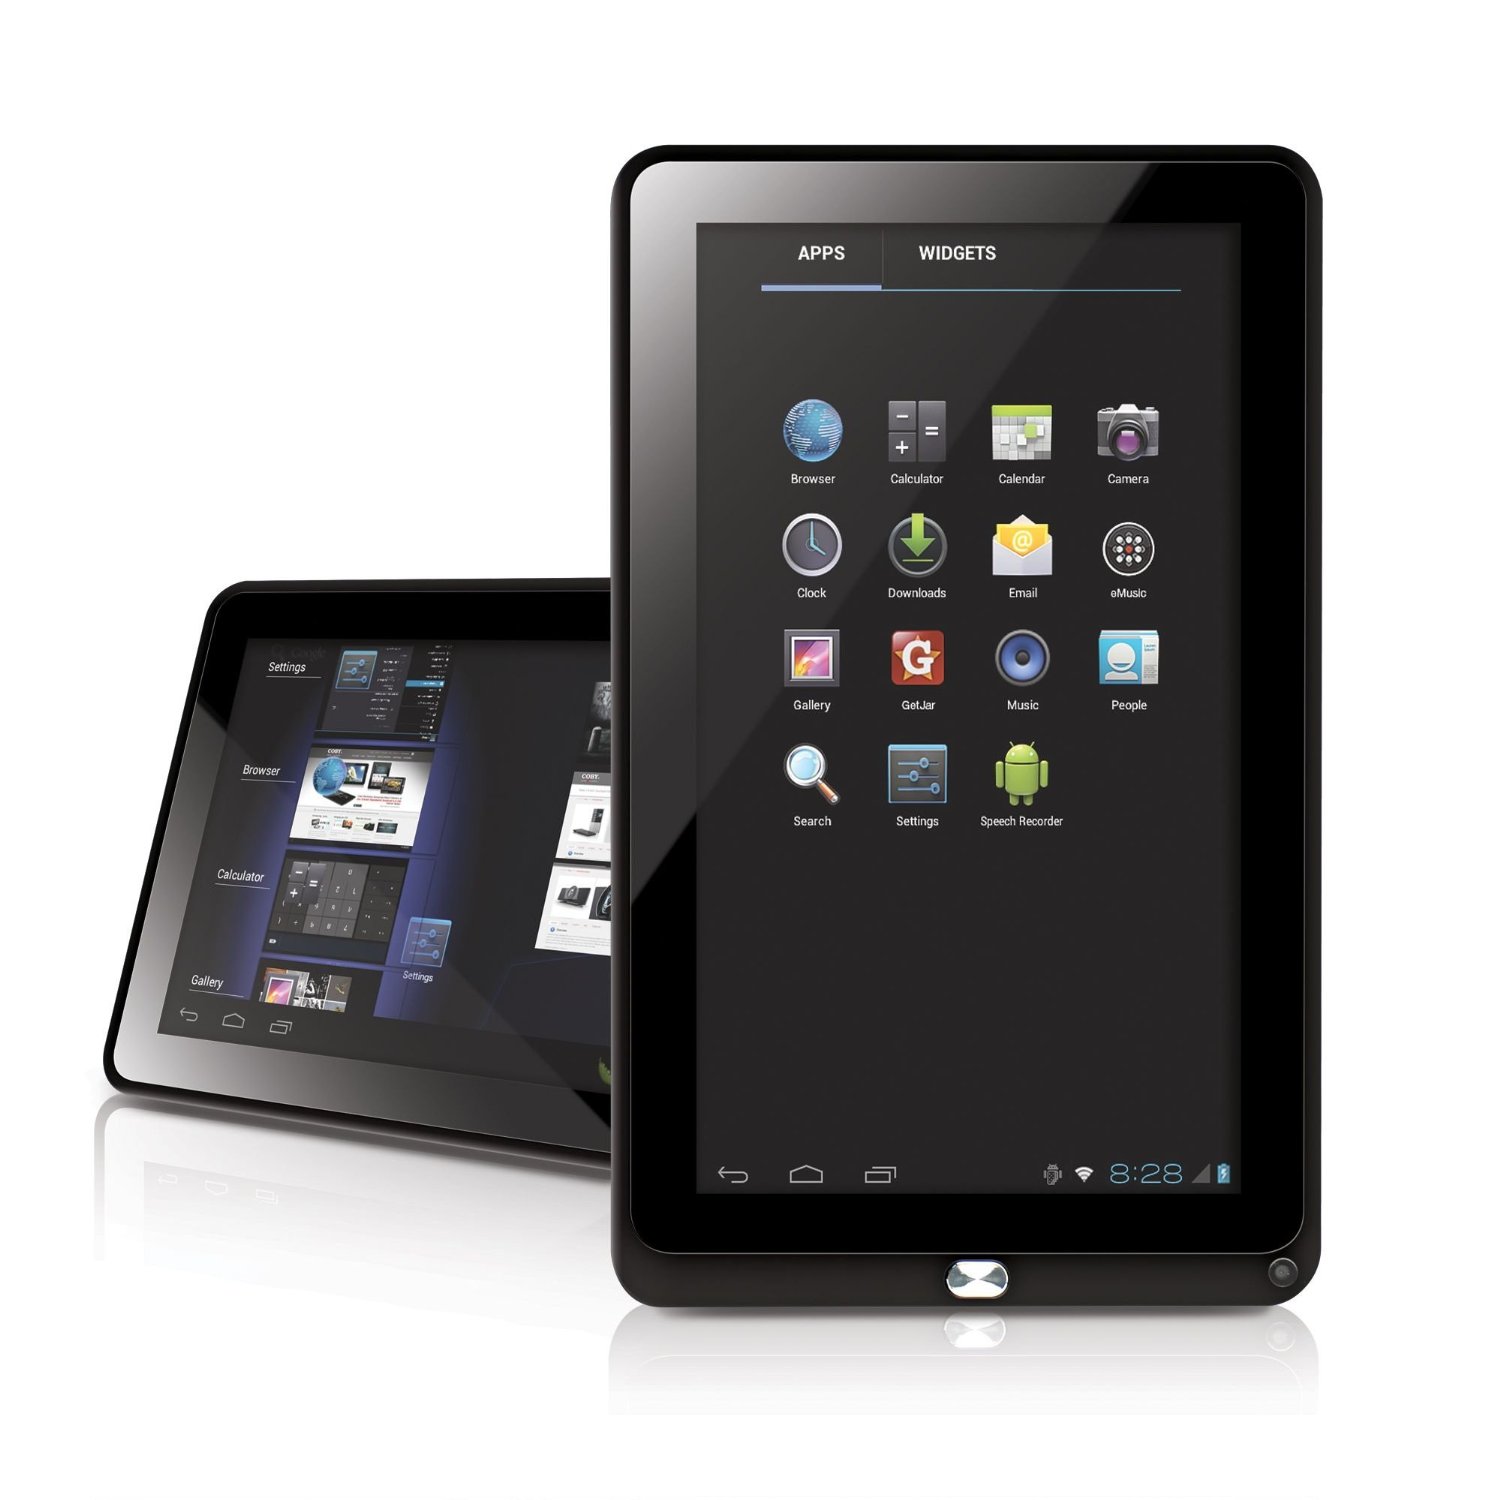 http://thetechjournal.com/wp-content/uploads/images/1206/1339867848-coby-kyros-101inch-android-powered-internet-tablet-9.jpg